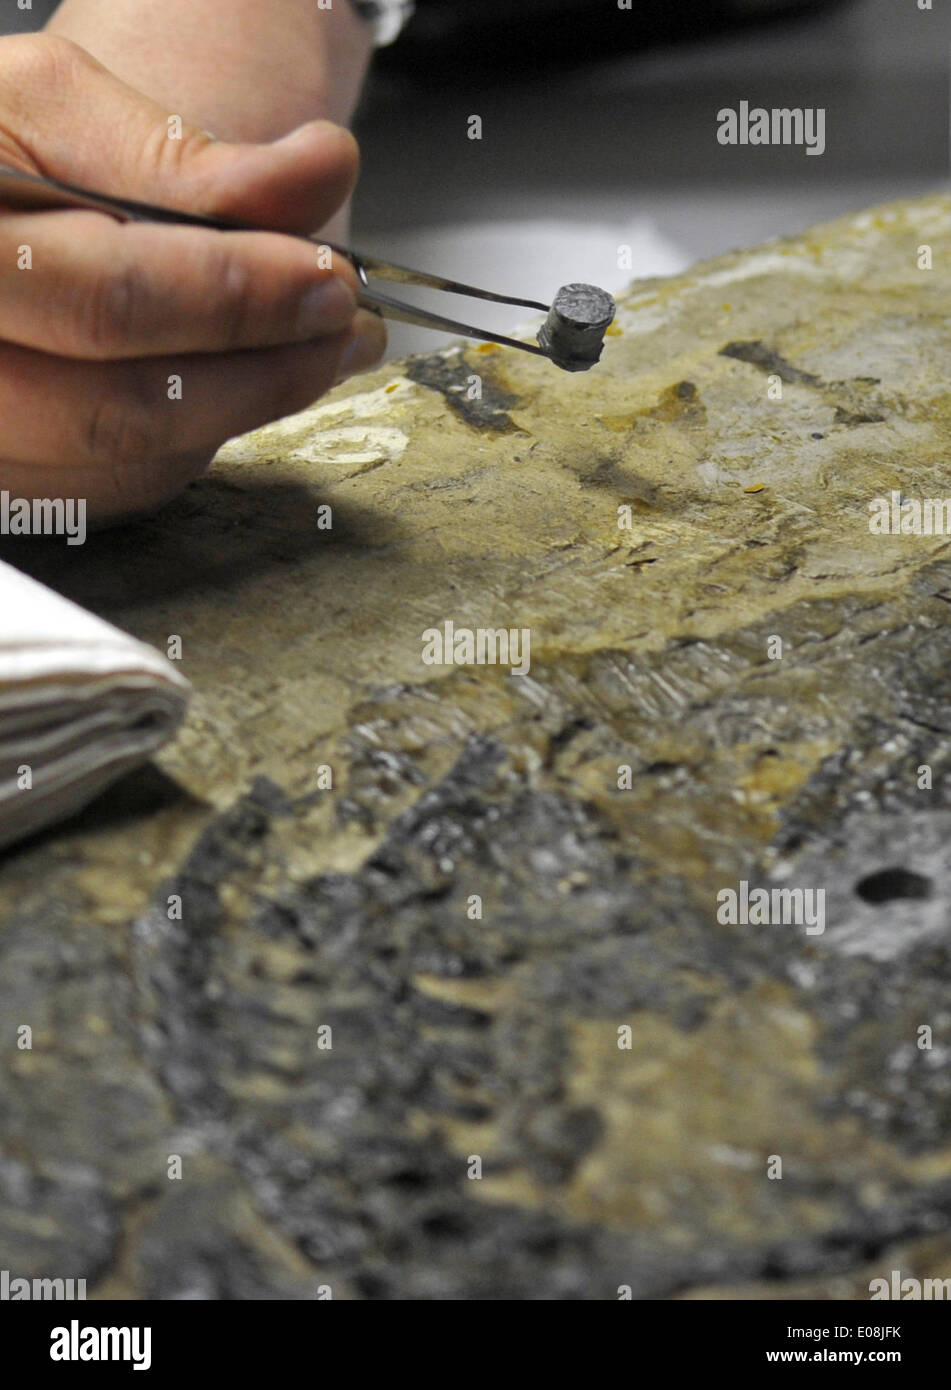 Freiberg, Germany. 06th May, 2014. Paleontologists take a bone sample from the world's only fossil of a Pantelosaurus, a Saxony Pelycosaurus from the Permian age, in Freiberg, Germany, 06 May 2014. Thin slices of bone have been taken to research its growth under the microscope. Photo: MATTHIAS HIEKEL/dpa/Alamy Live News Stock Photo